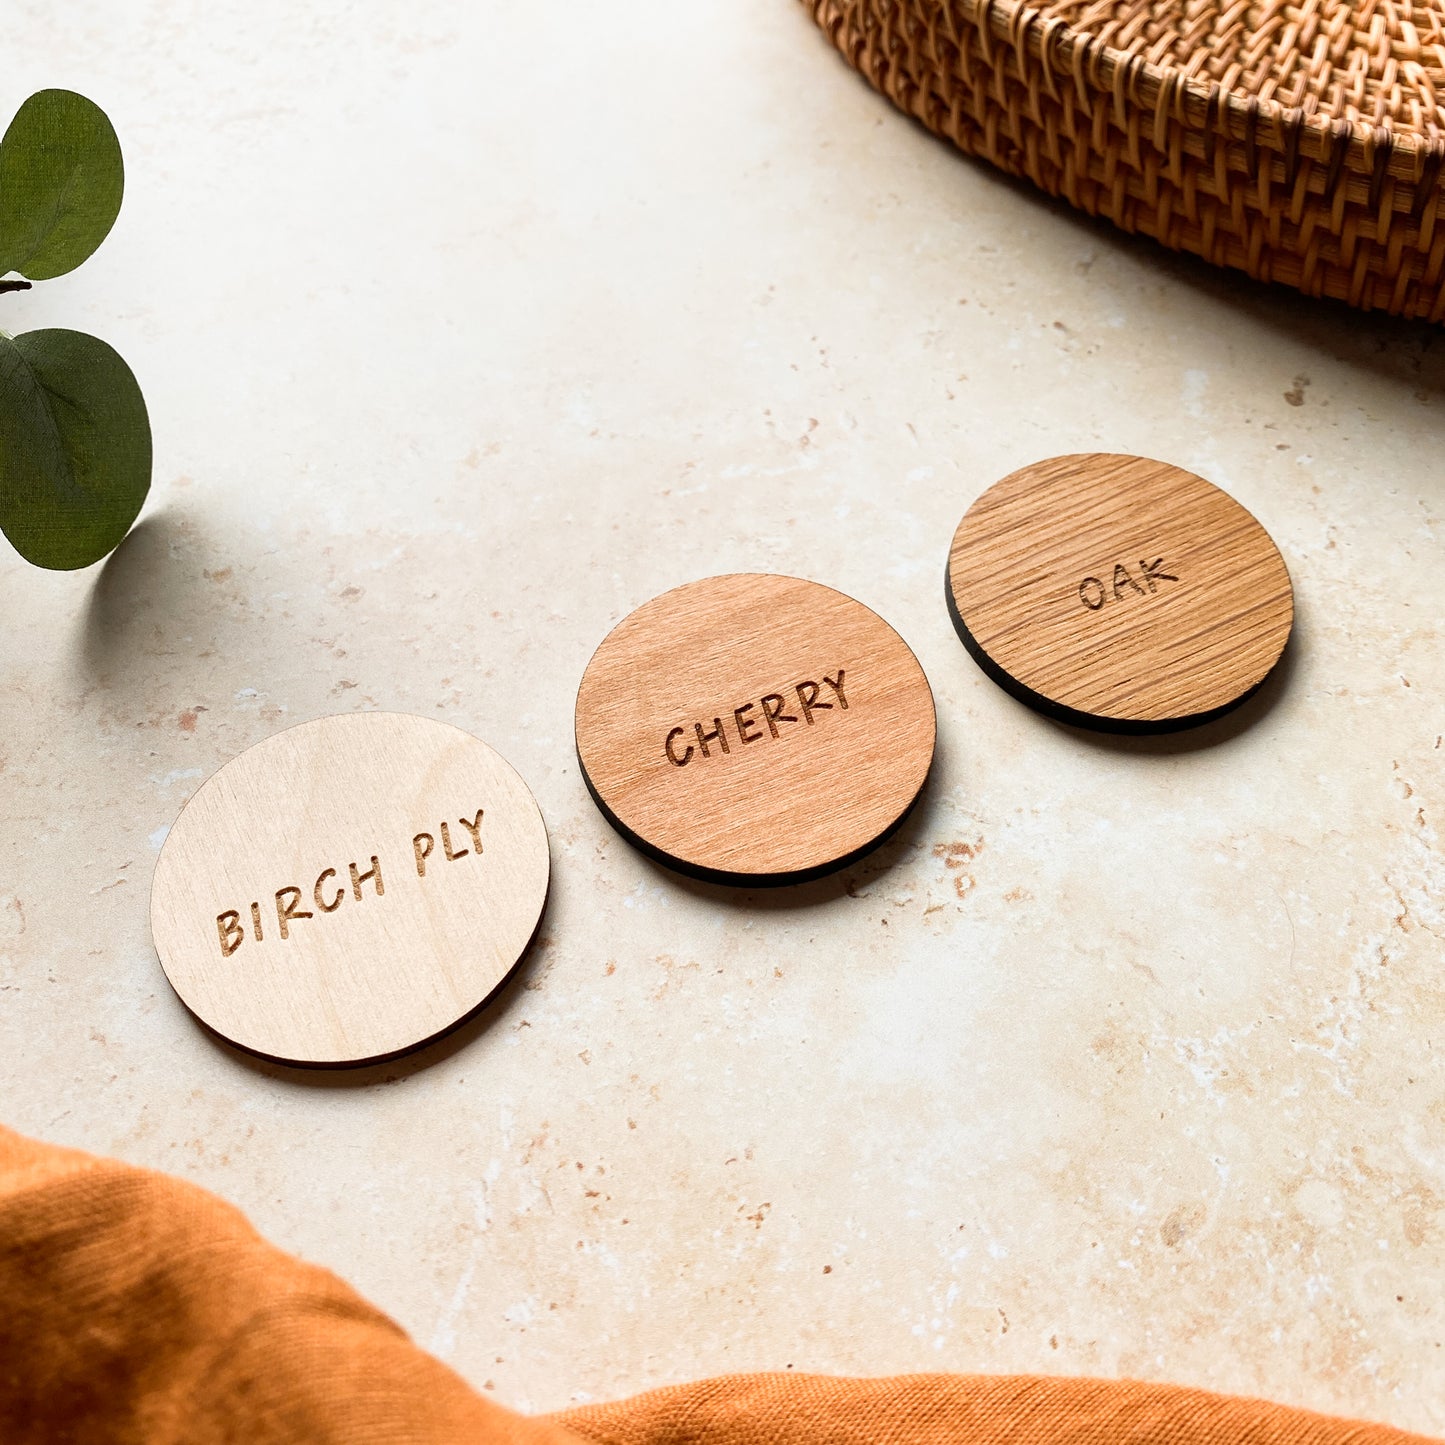 Round Wooden Something You Want Gift Tags